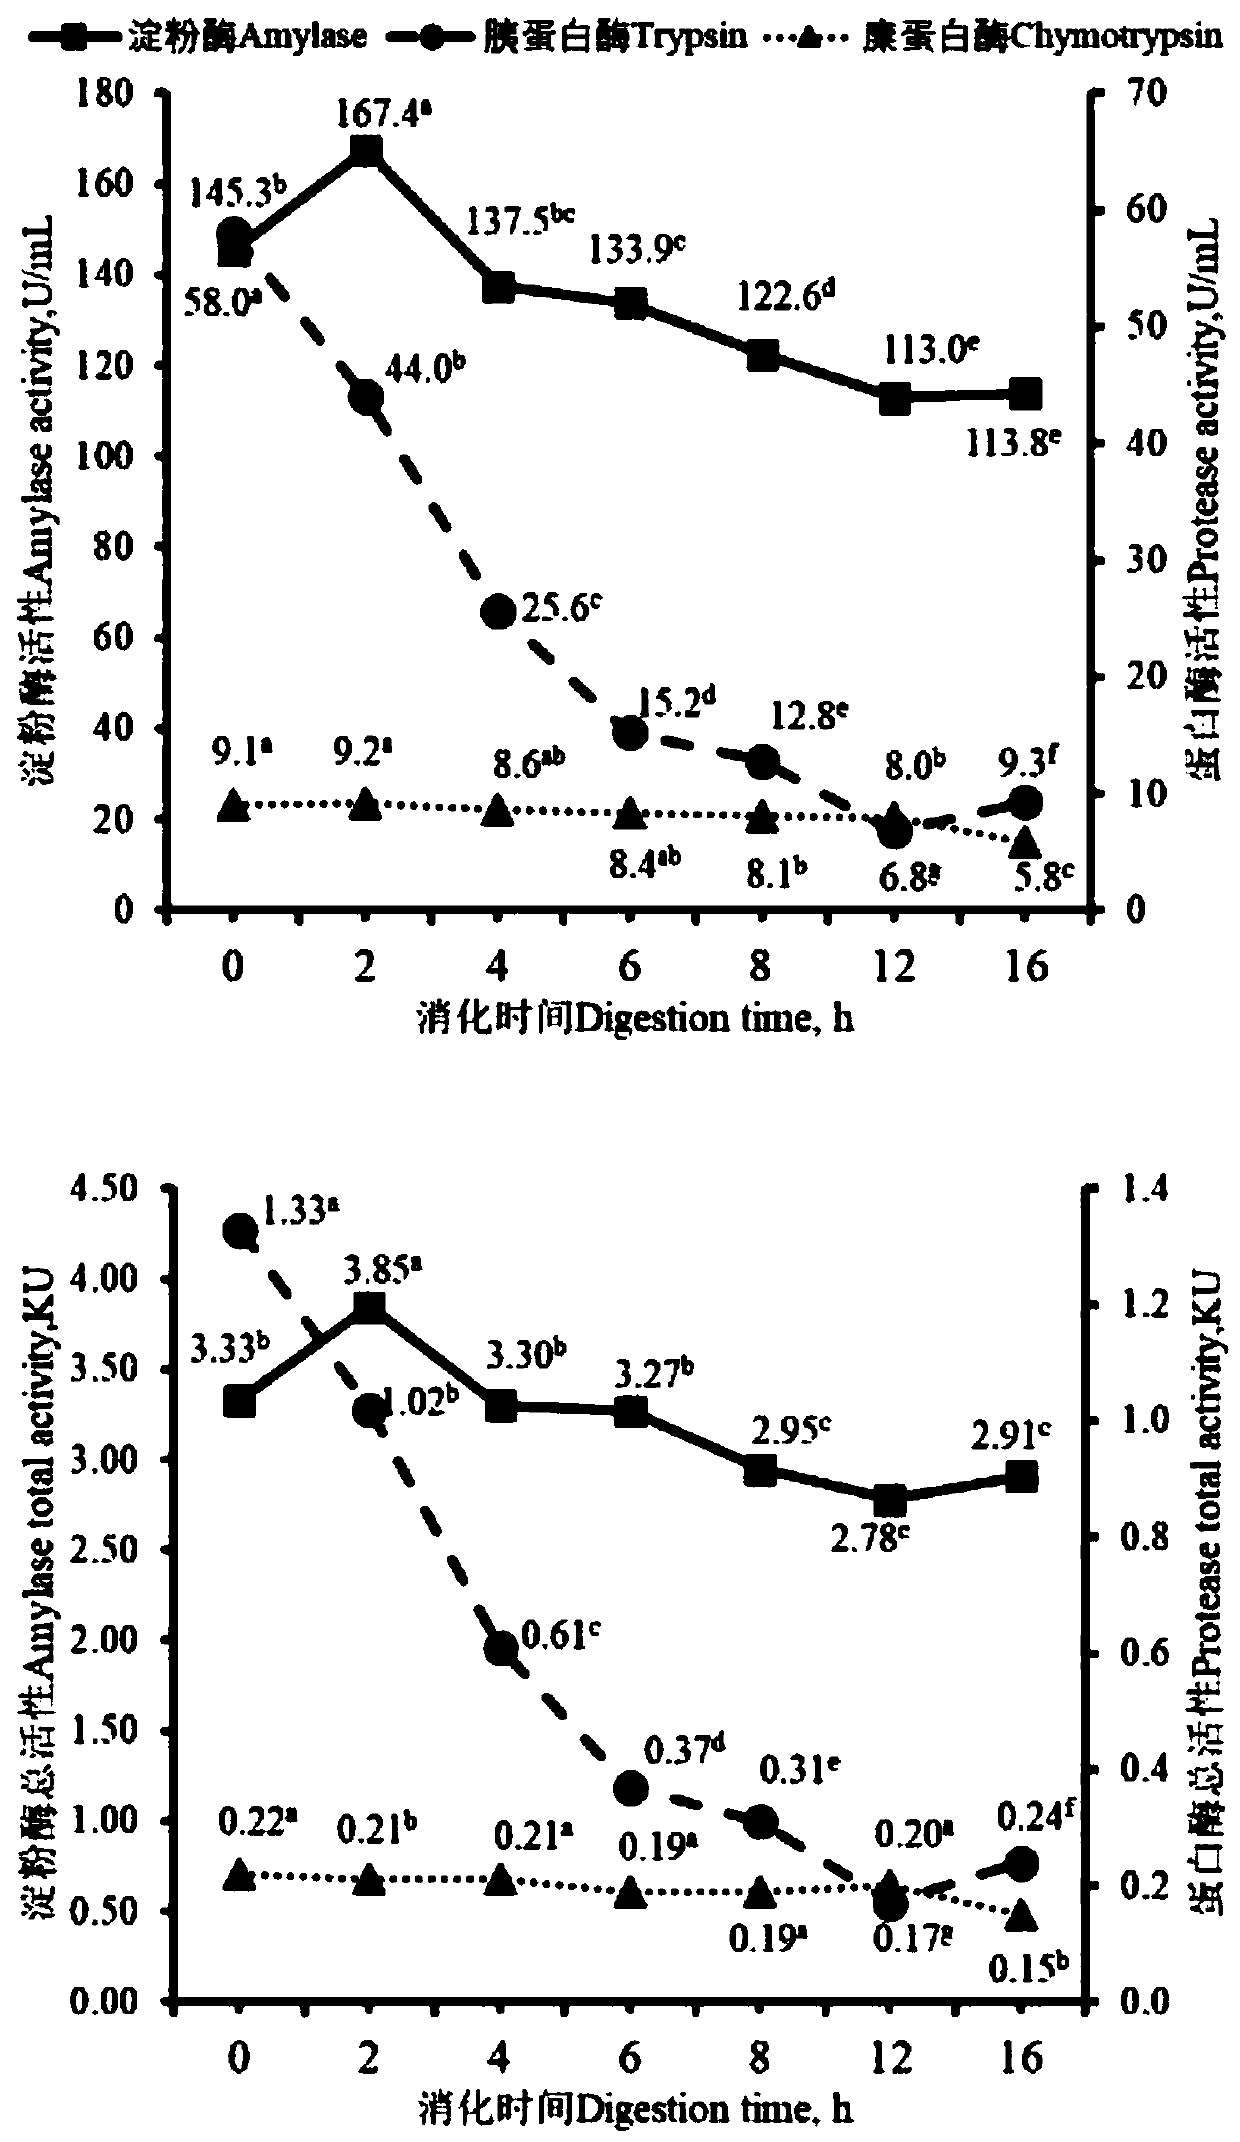 Biomimetic digestion measuring method for pig feedstuff protein digestibility